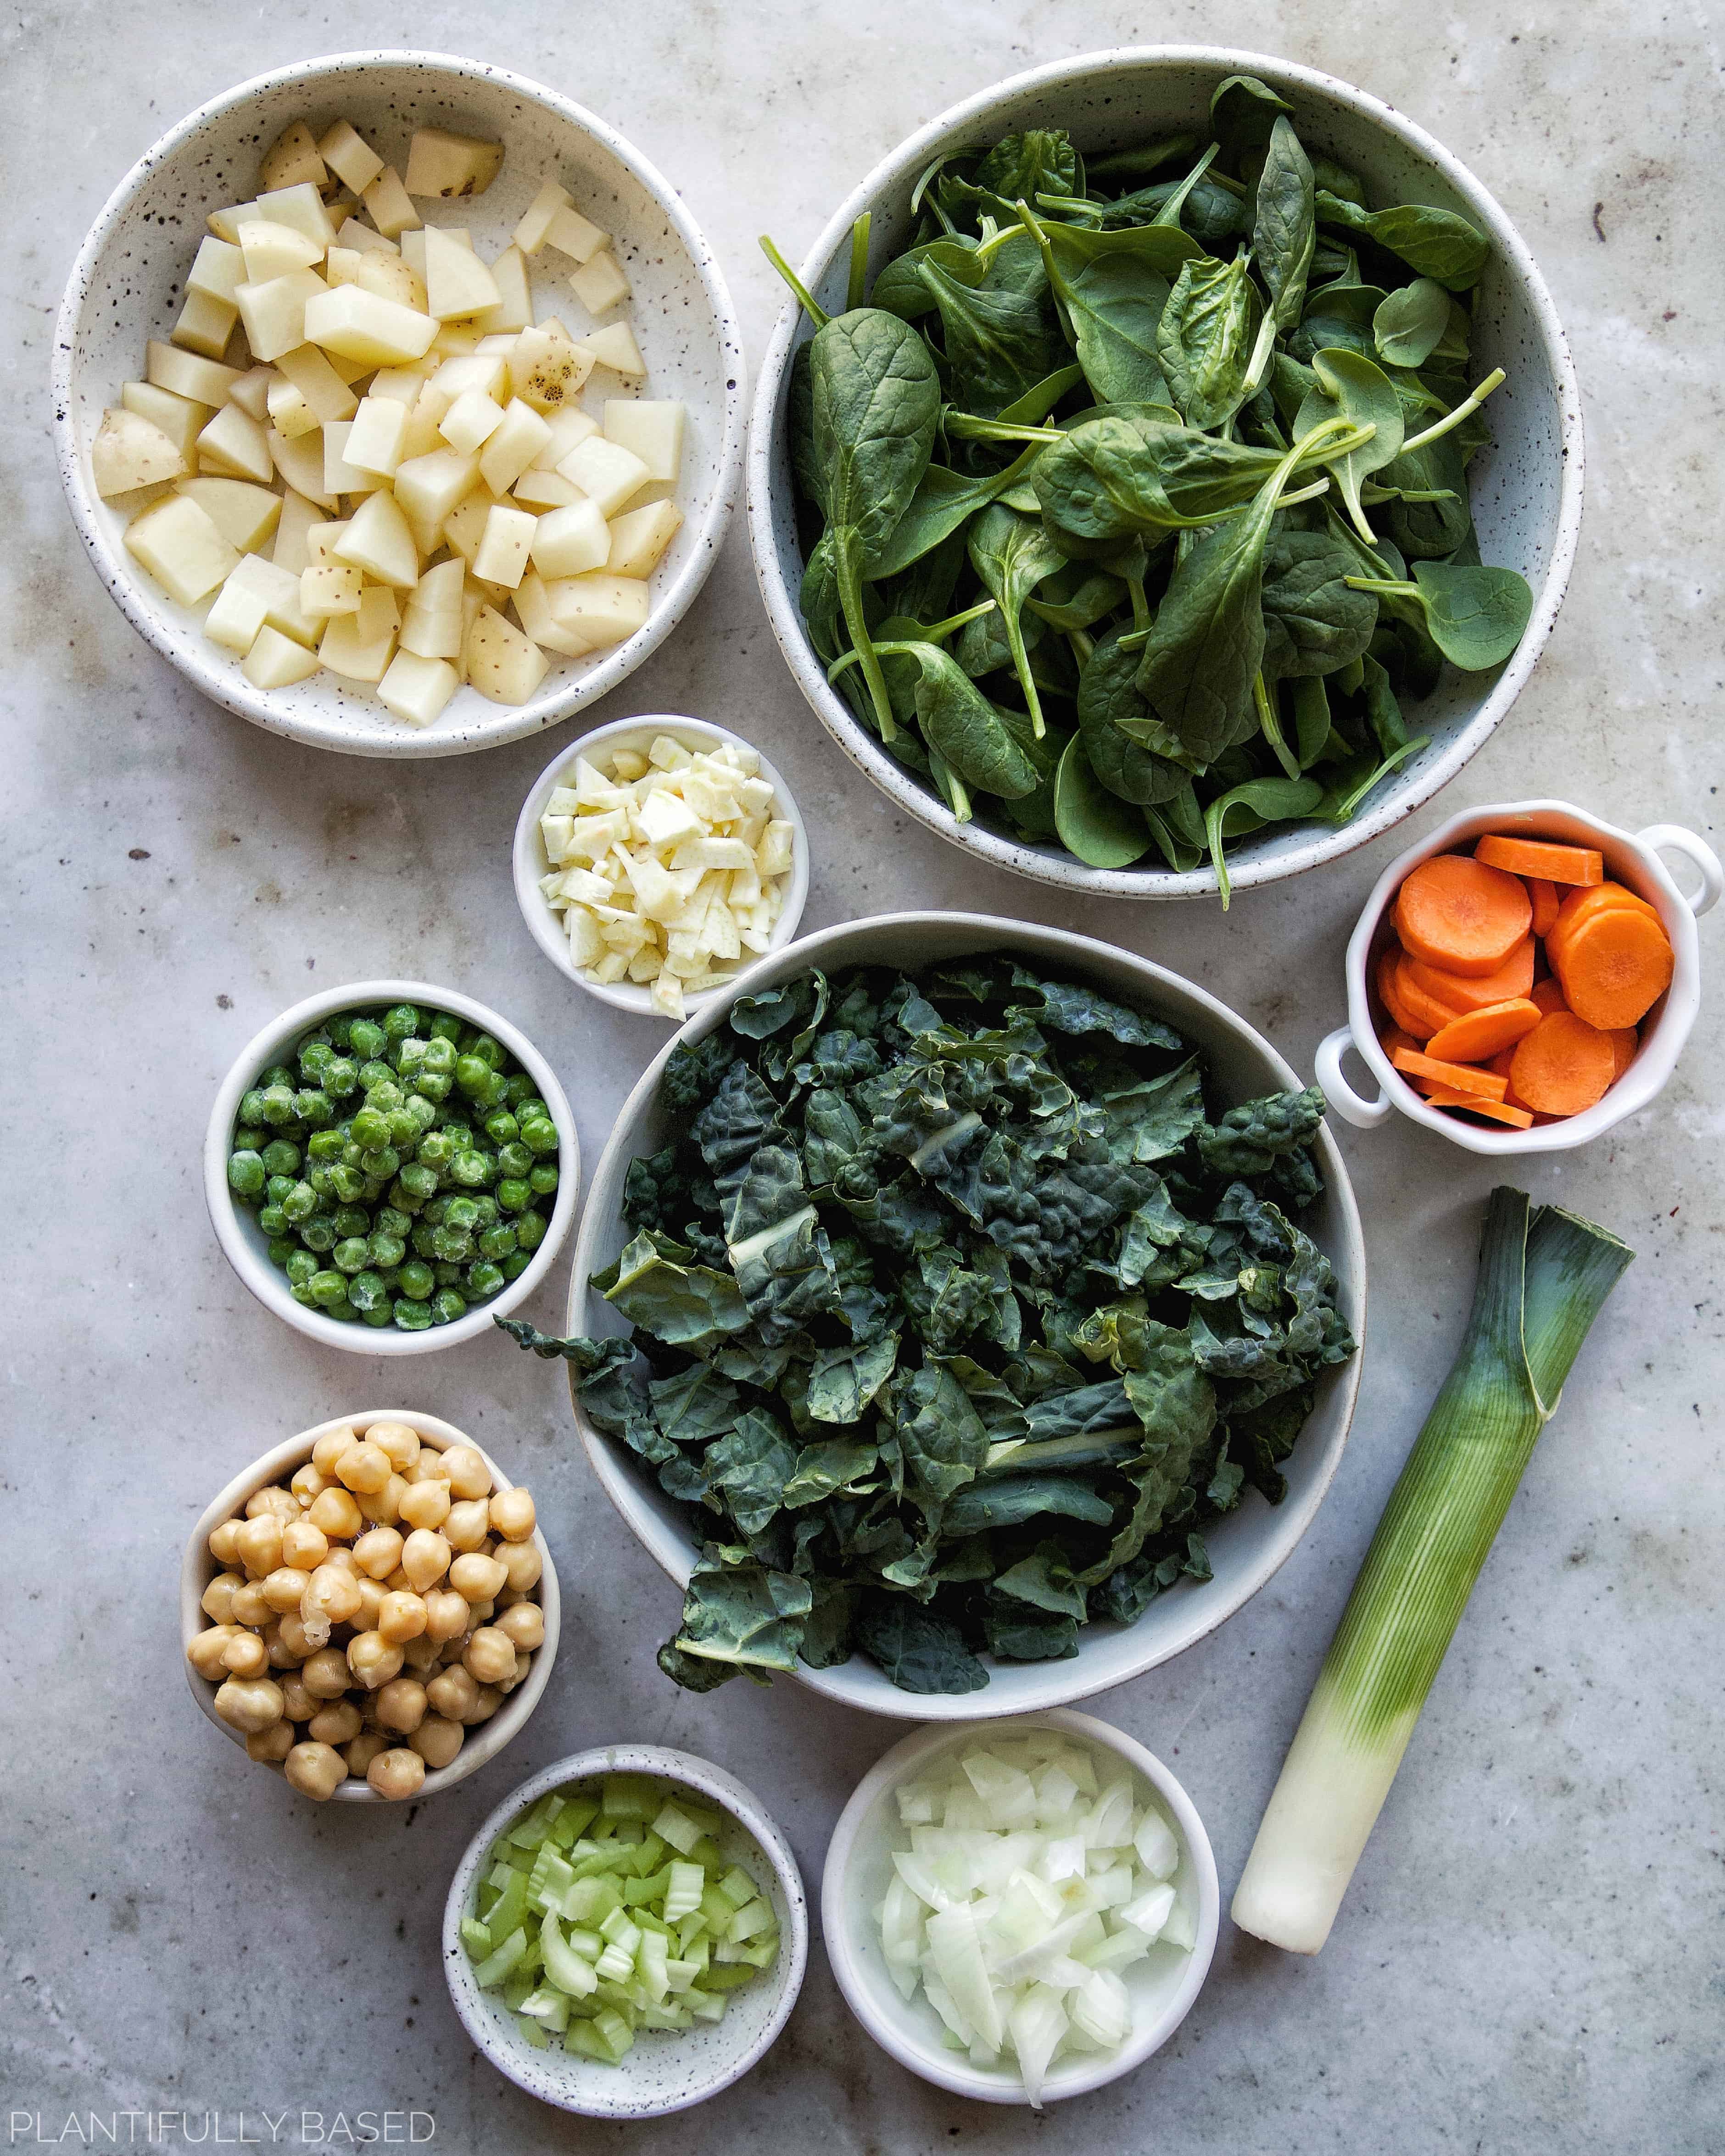 ingredients for spring green minestrone soup - potatoes, spinach, garlic, peas, carrots, kale, chickpeas, and leeks